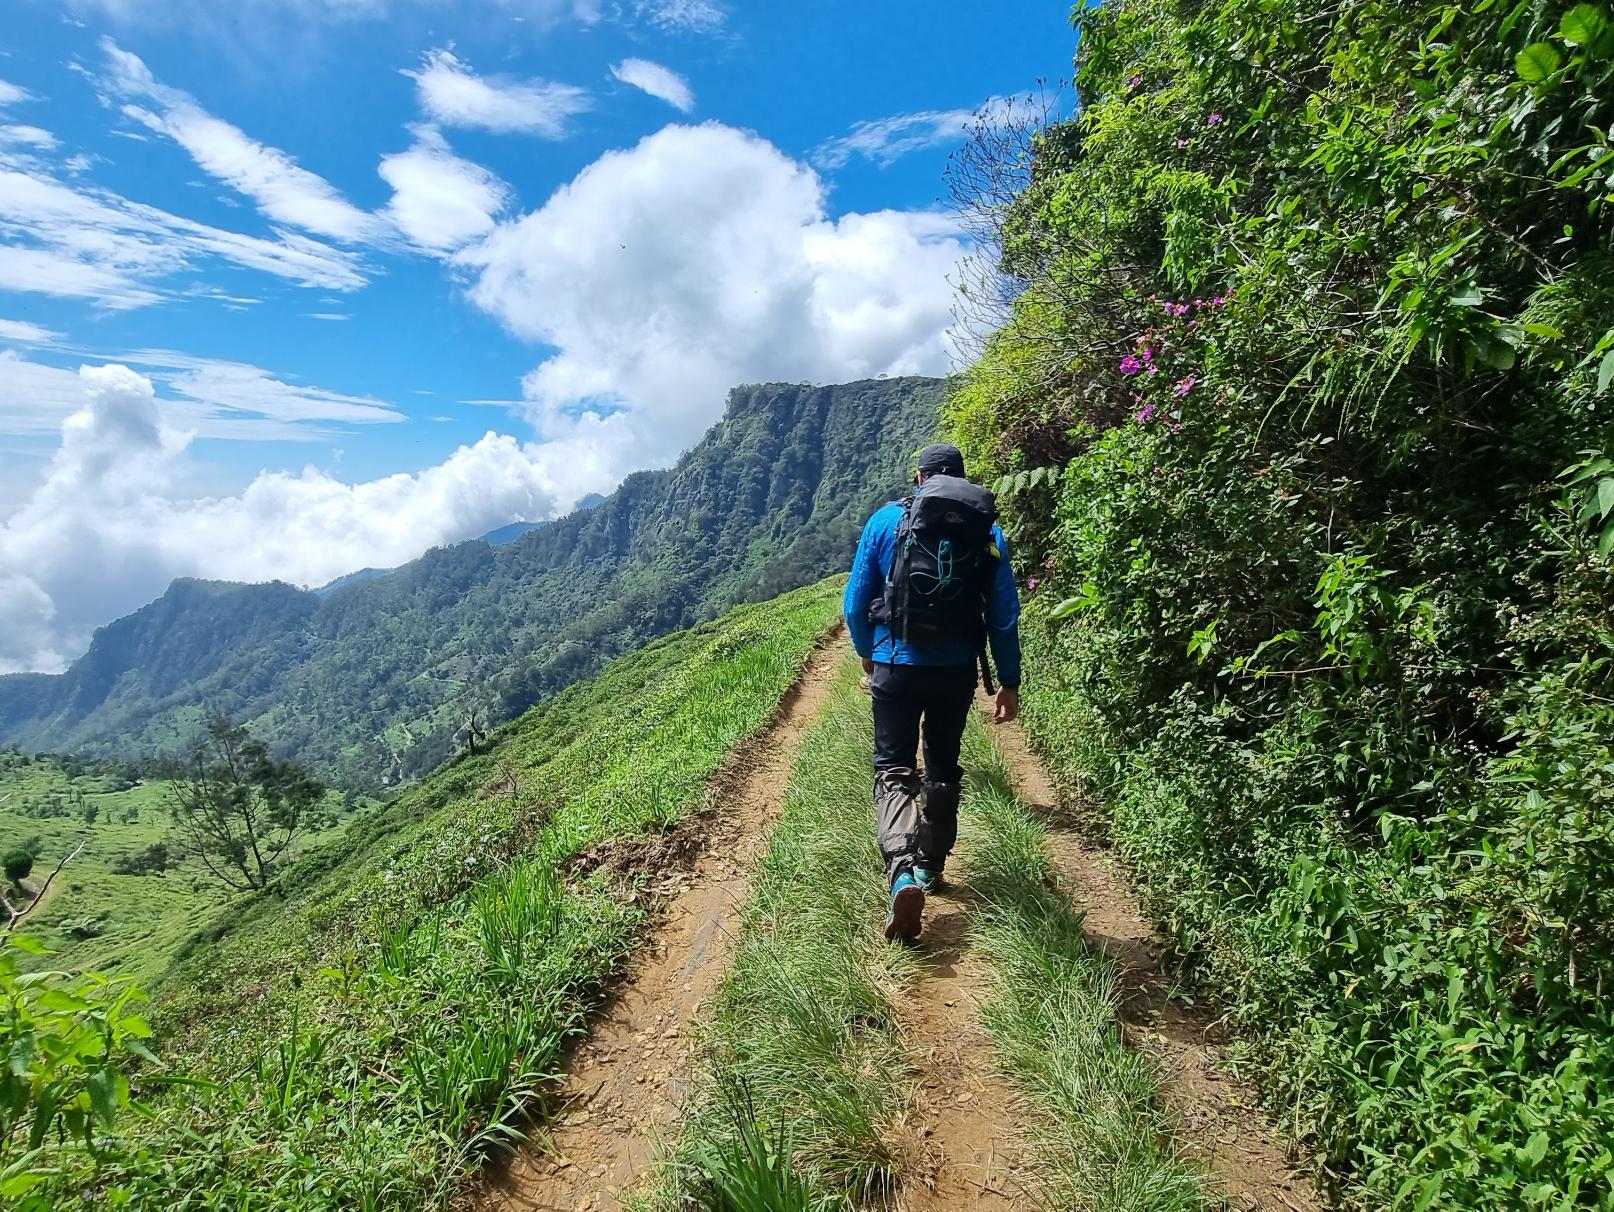 Hikers on the Pekoe Trail, in Horton Plains National Park. Photo: Much Better Adventures.